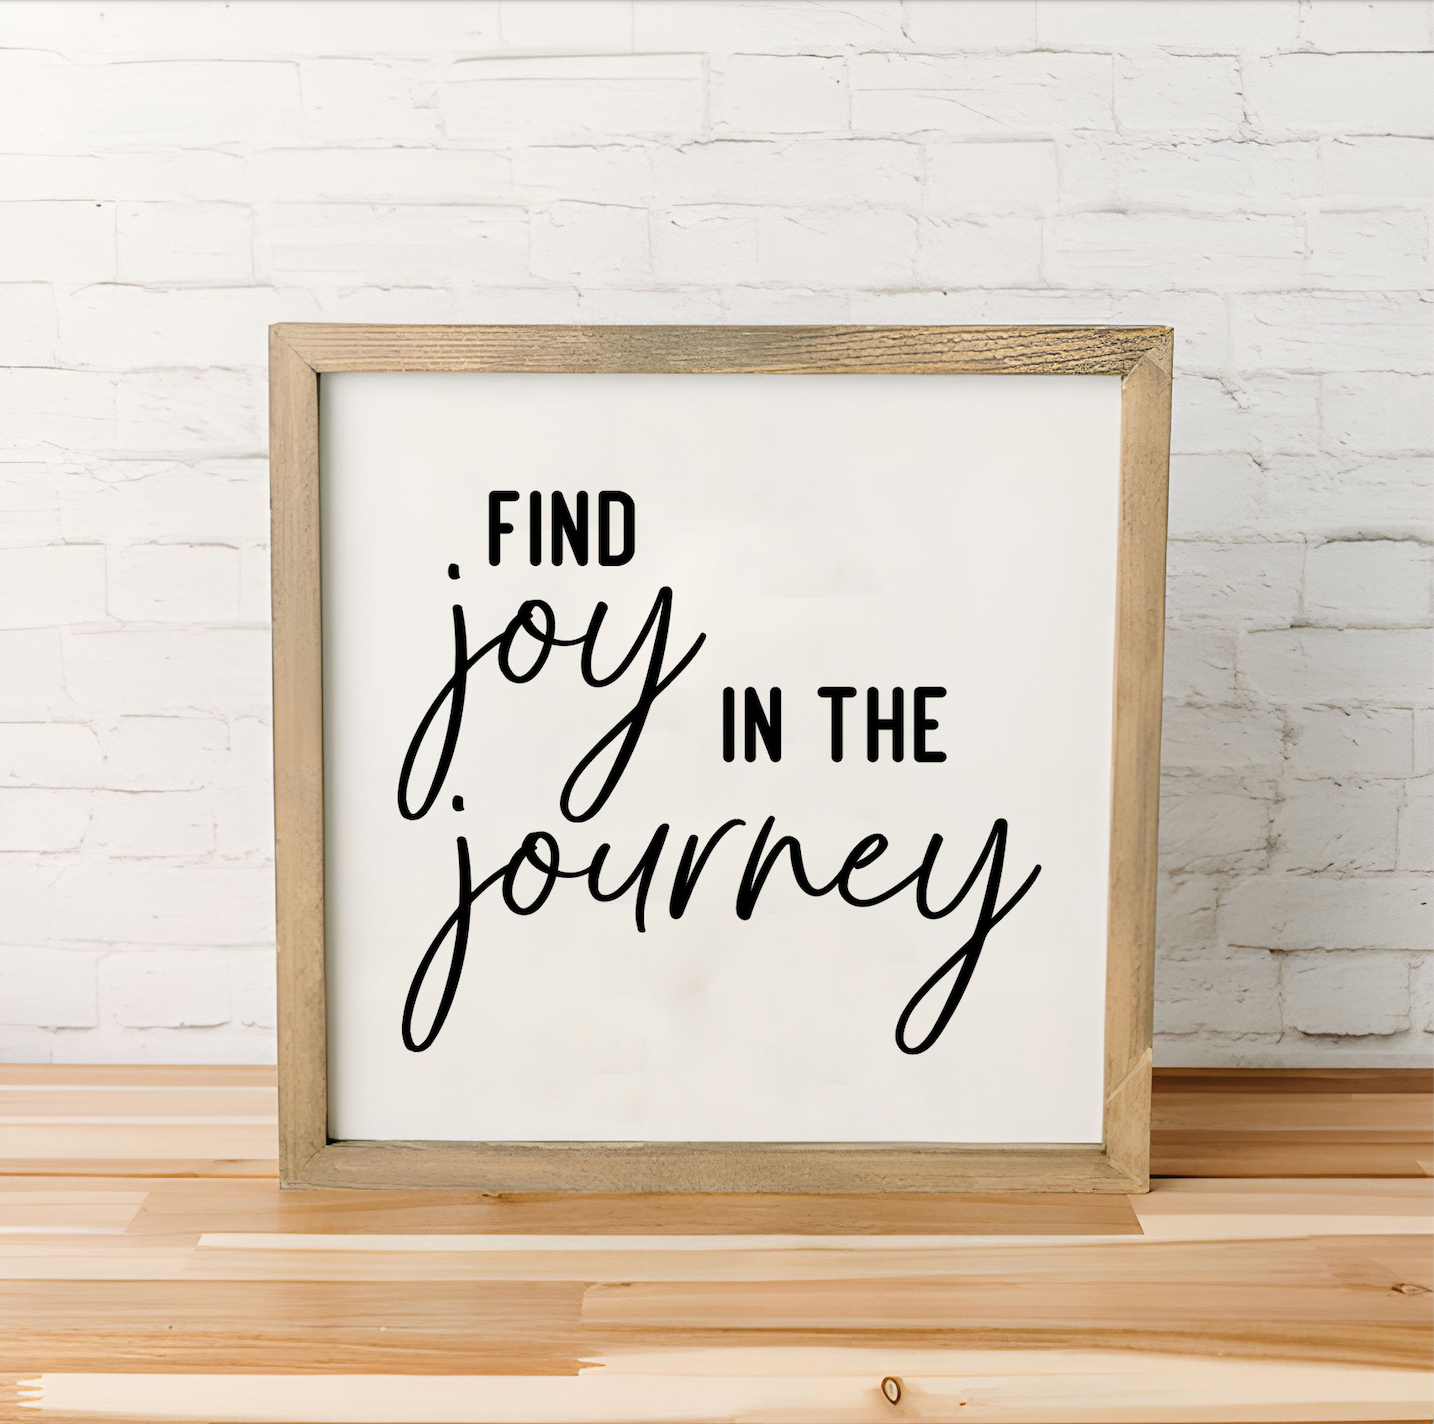 Find Joy in the Journey | 16x16 inch Wood Framed Sign